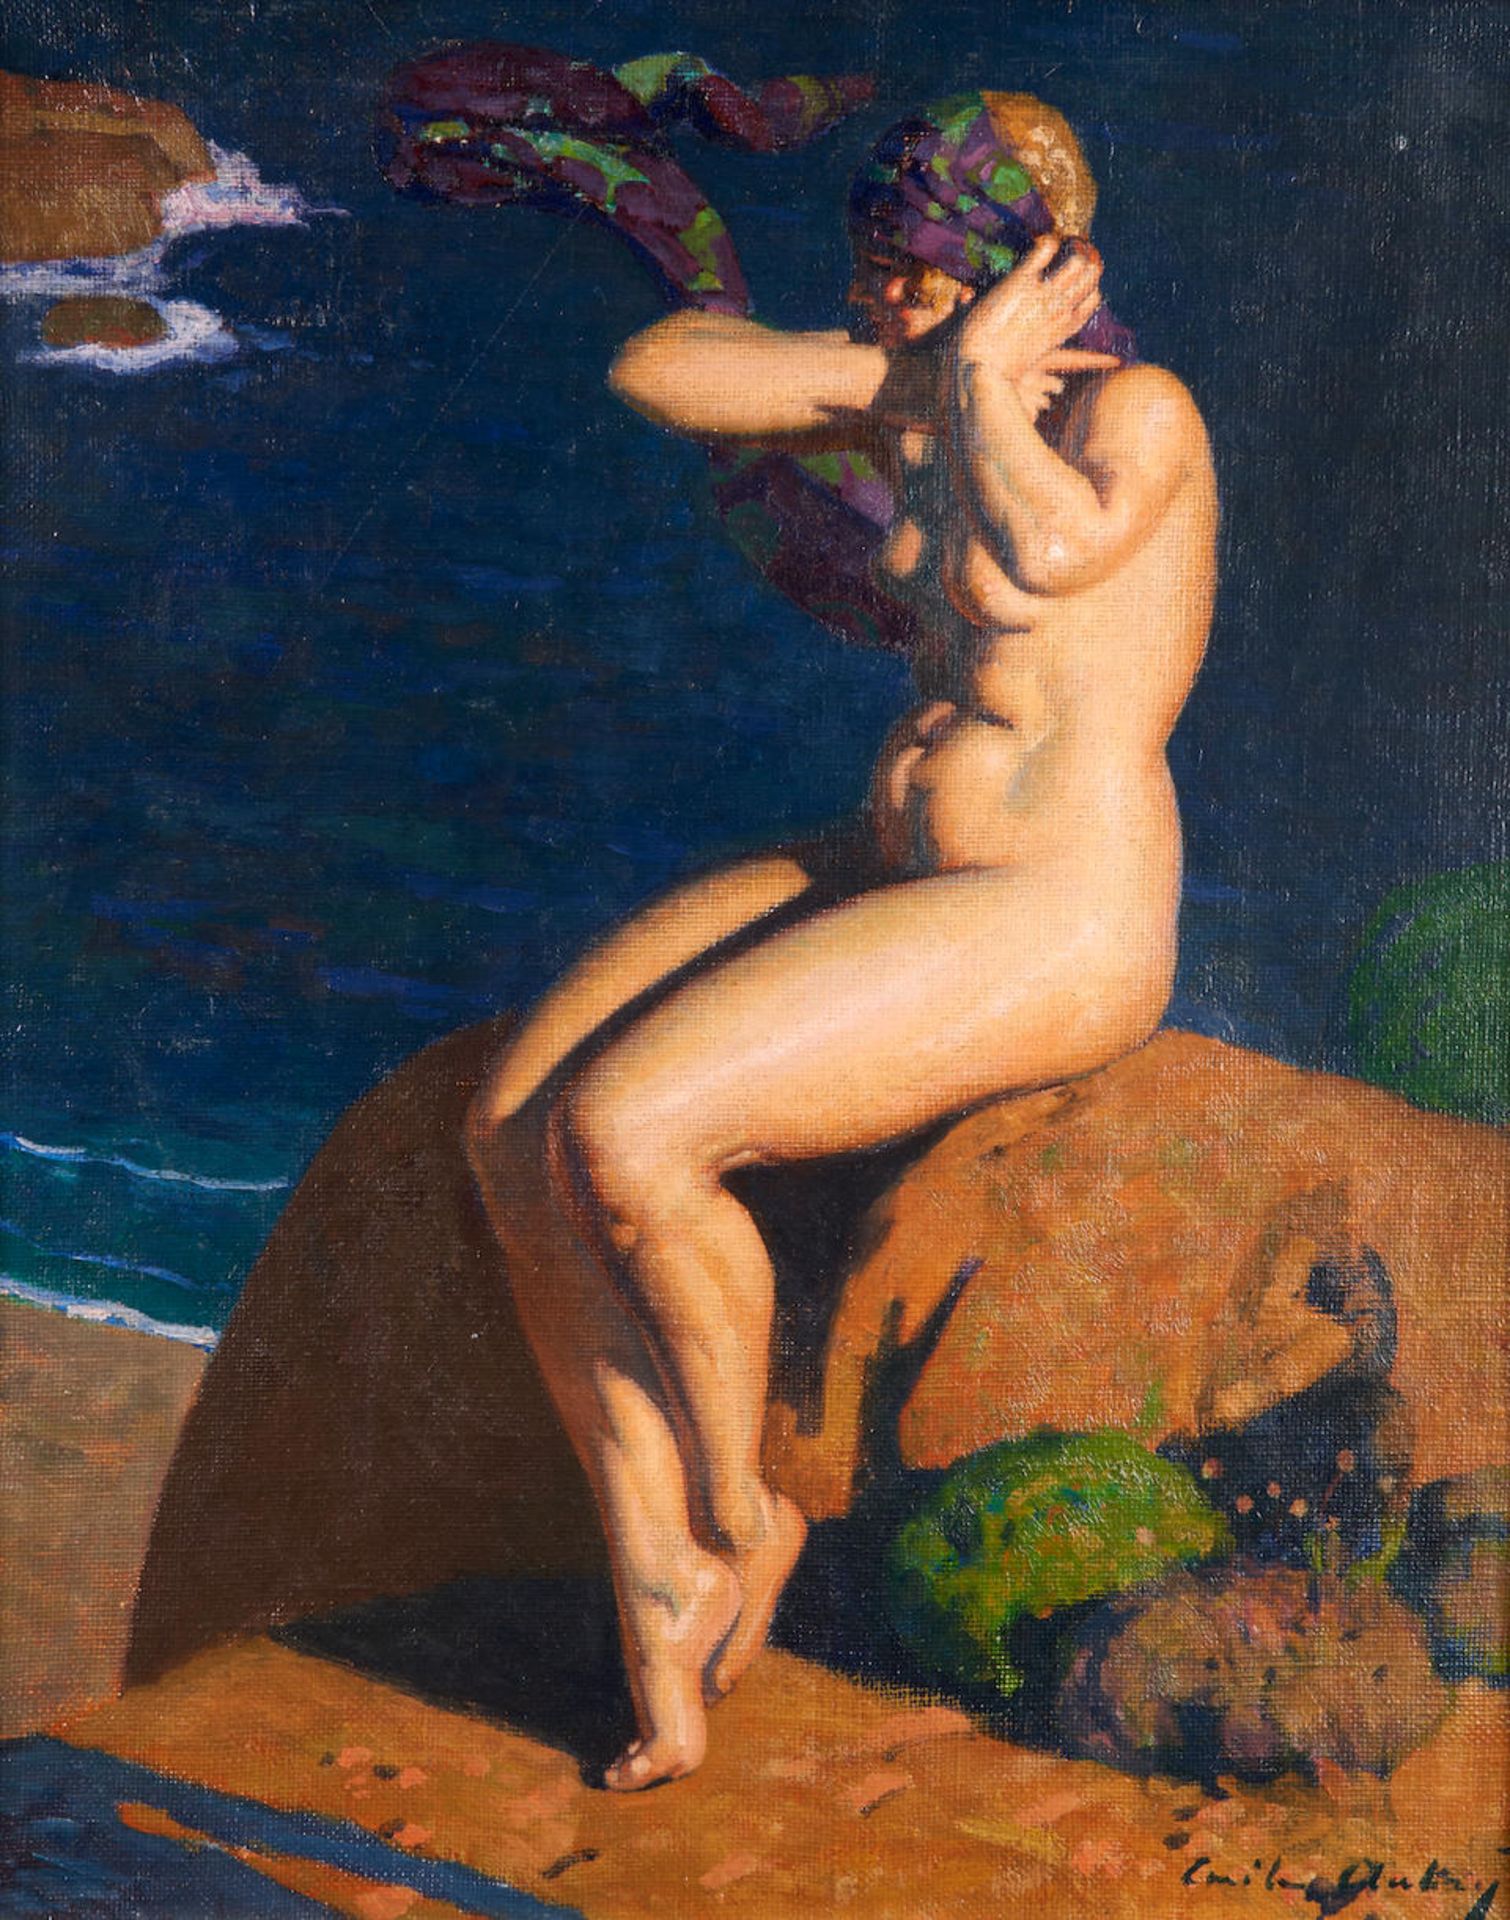 FRENCH SCHOOL PAINTING DEPICTING A NUDE WOMAN WITH HEADSCARF, early 20th century, oil on canvas,...